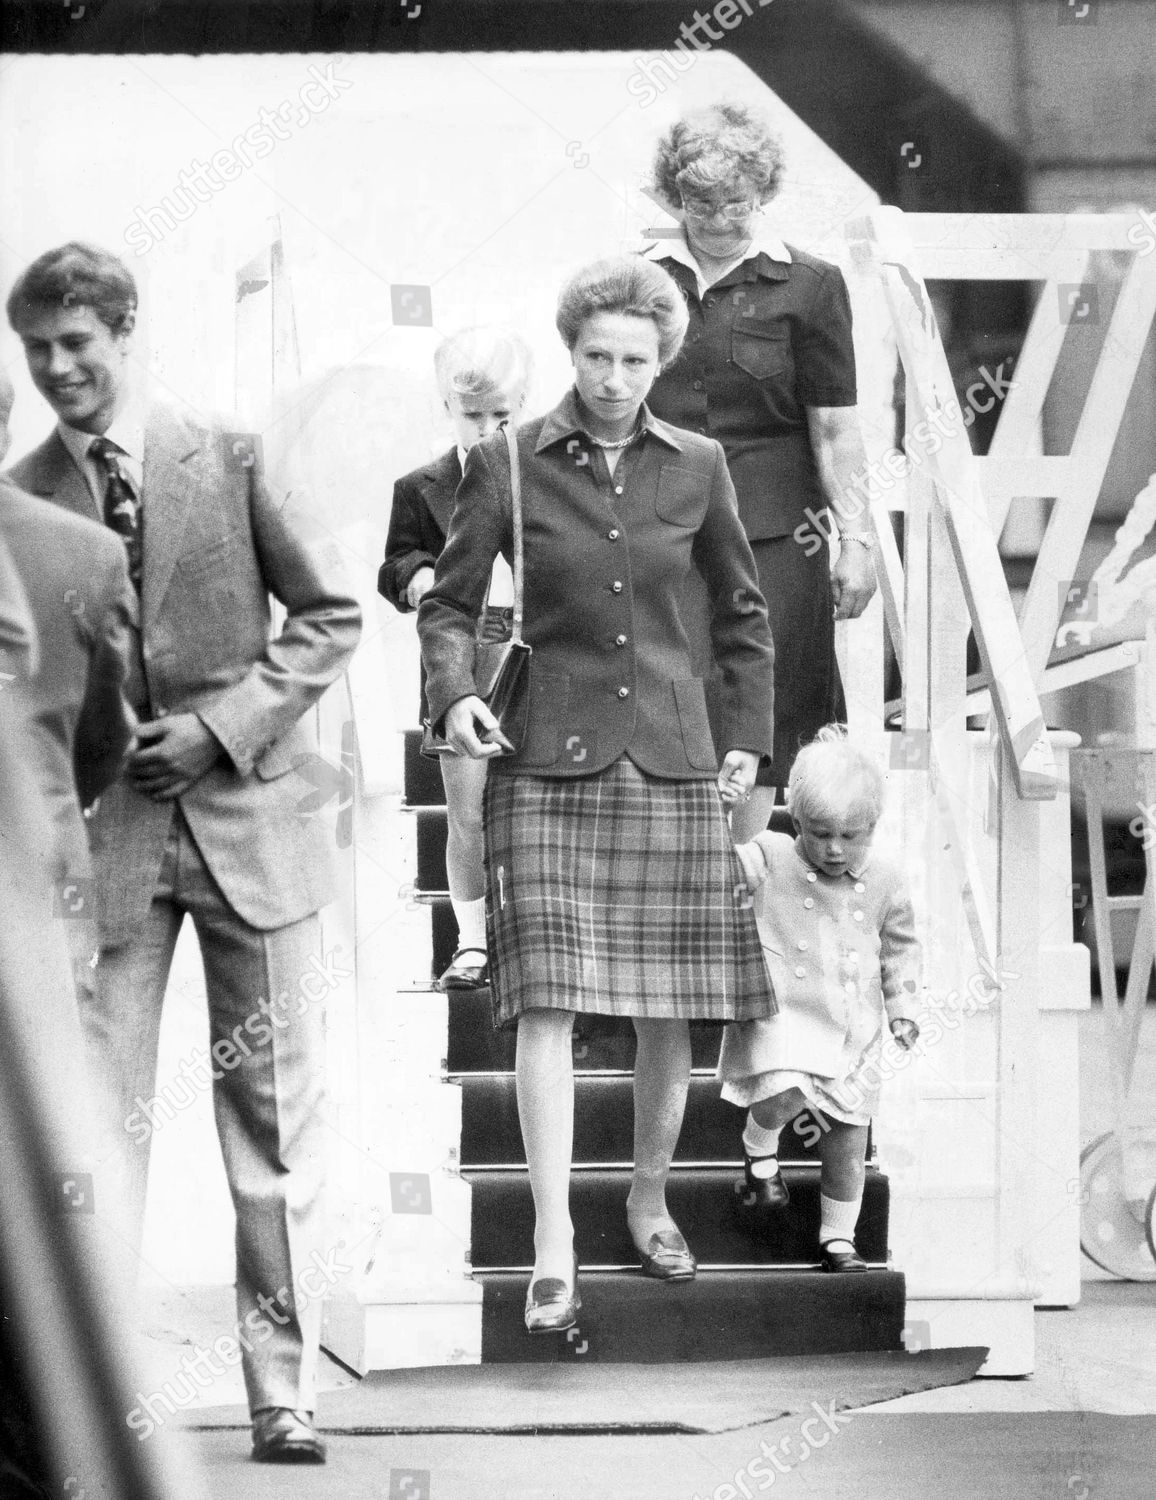 princess-anne-now-princess-royal-15th-august-1983-anne-zara-and-peter-leave-brittania-this-morning-royal-visits-shutterstock-editorial-1058921a.jpg